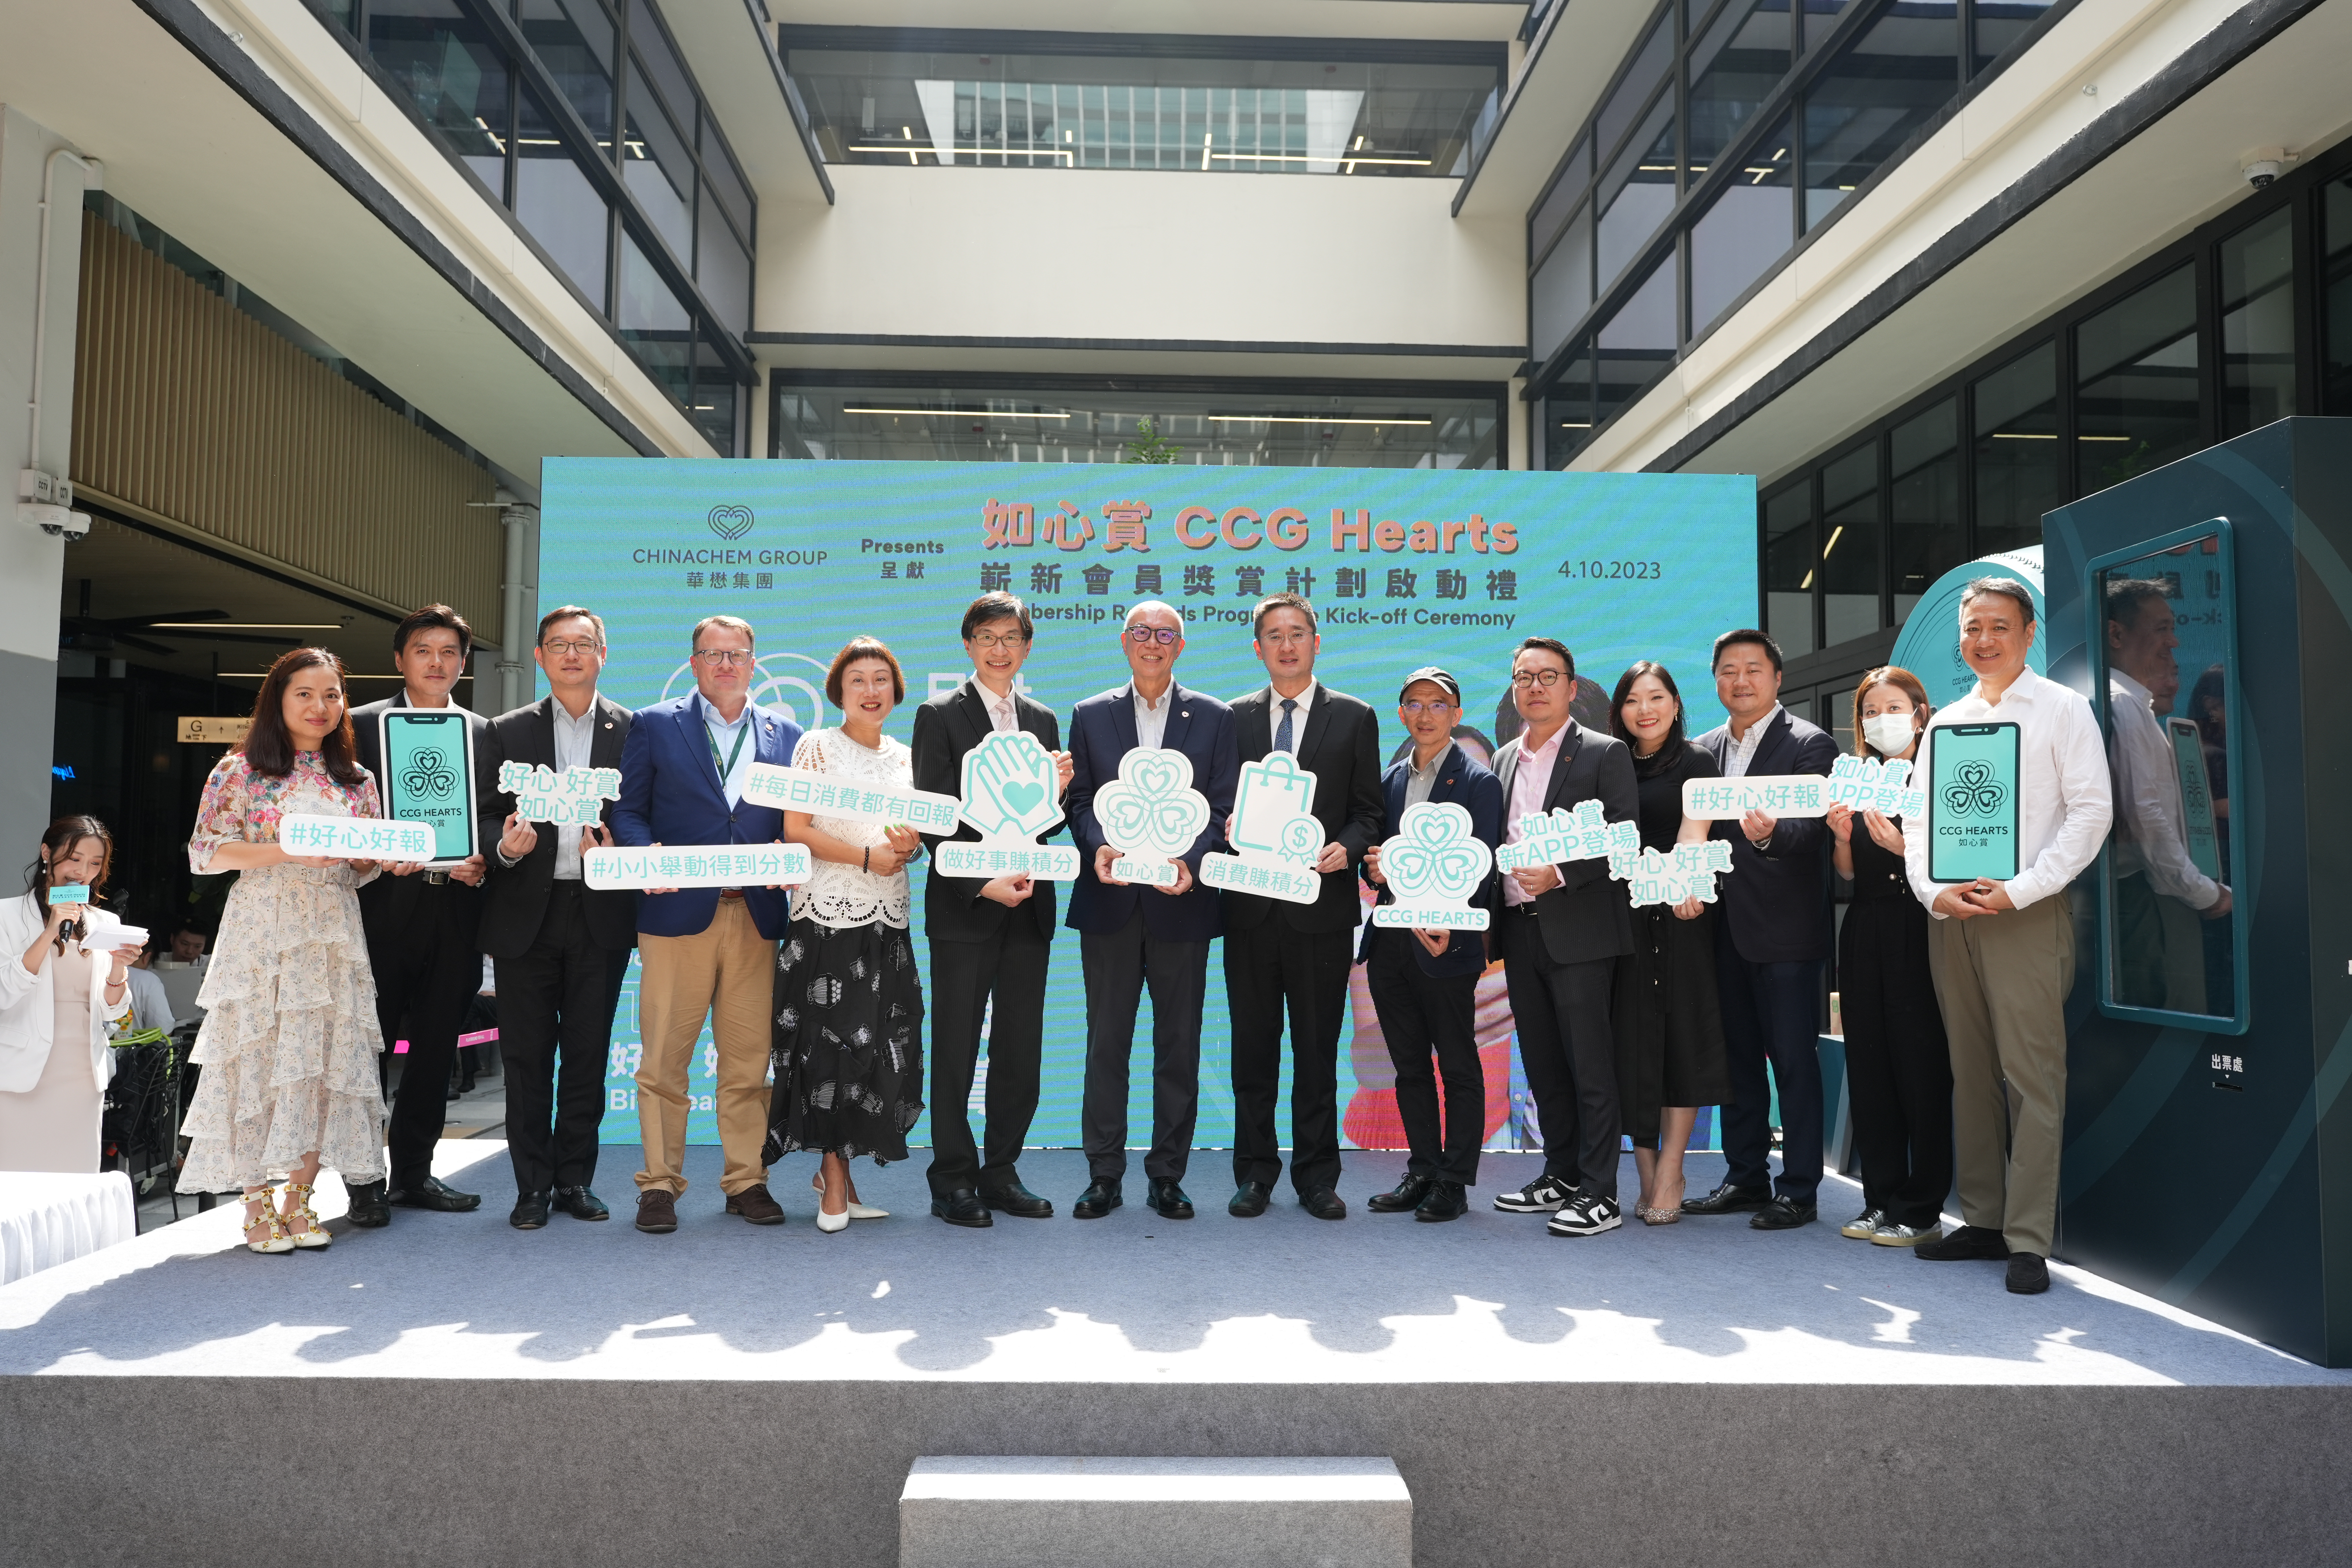 During the launch ceremony, the management team of Chinachem Group urged citizens to join the 